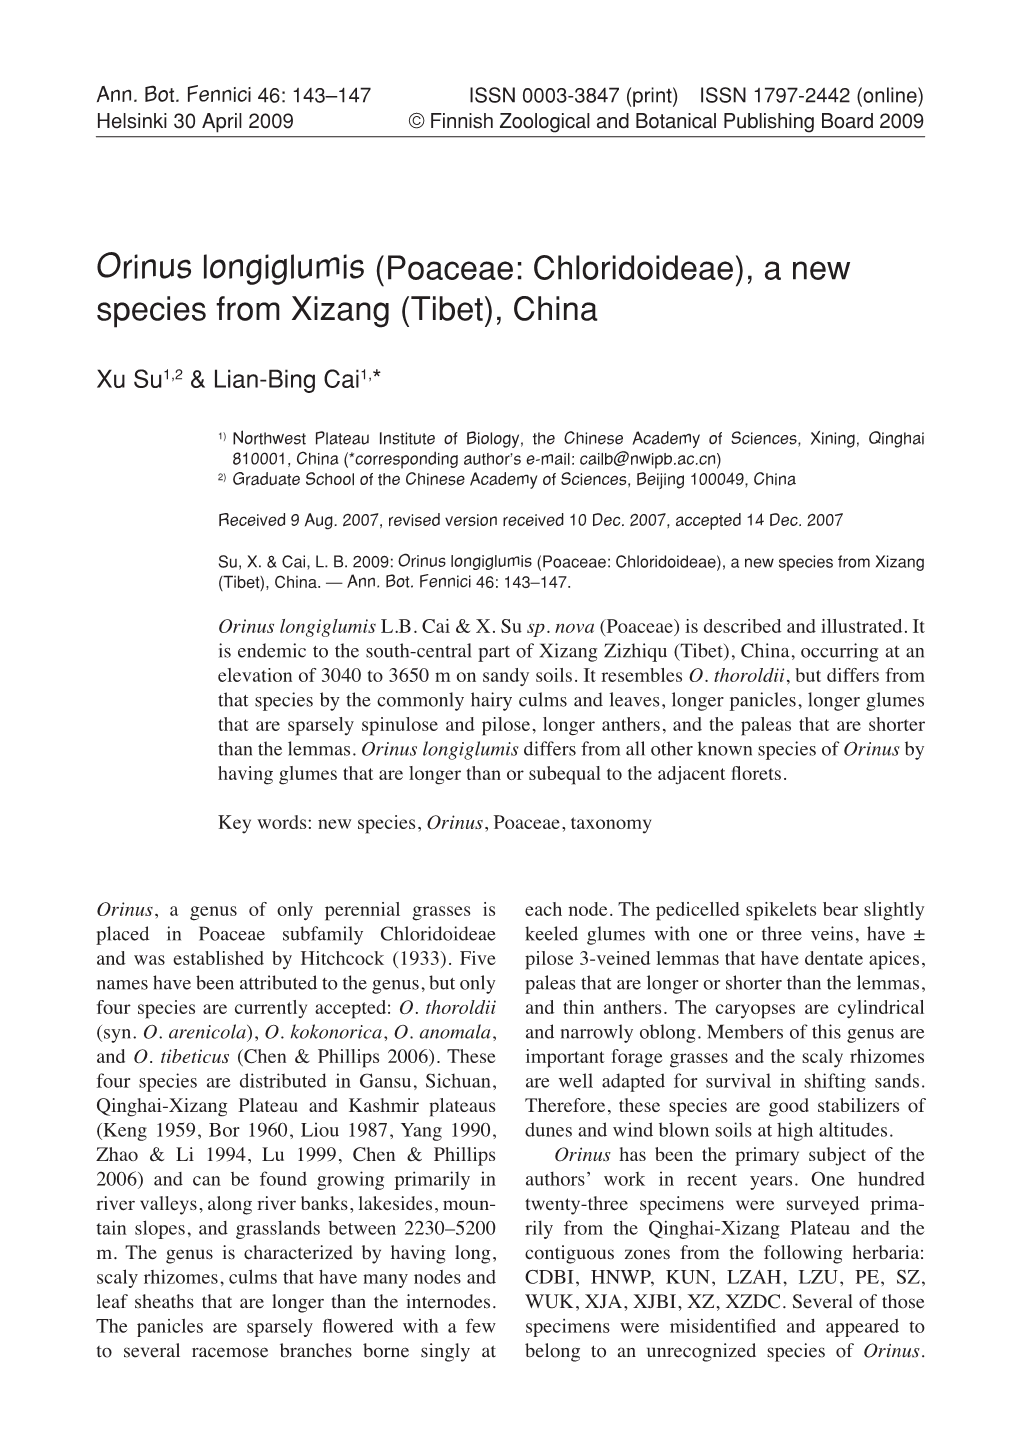 Orinus Longiglumis (Poaceae: Chloridoideae), a New Species from Xizang (Tibet), China